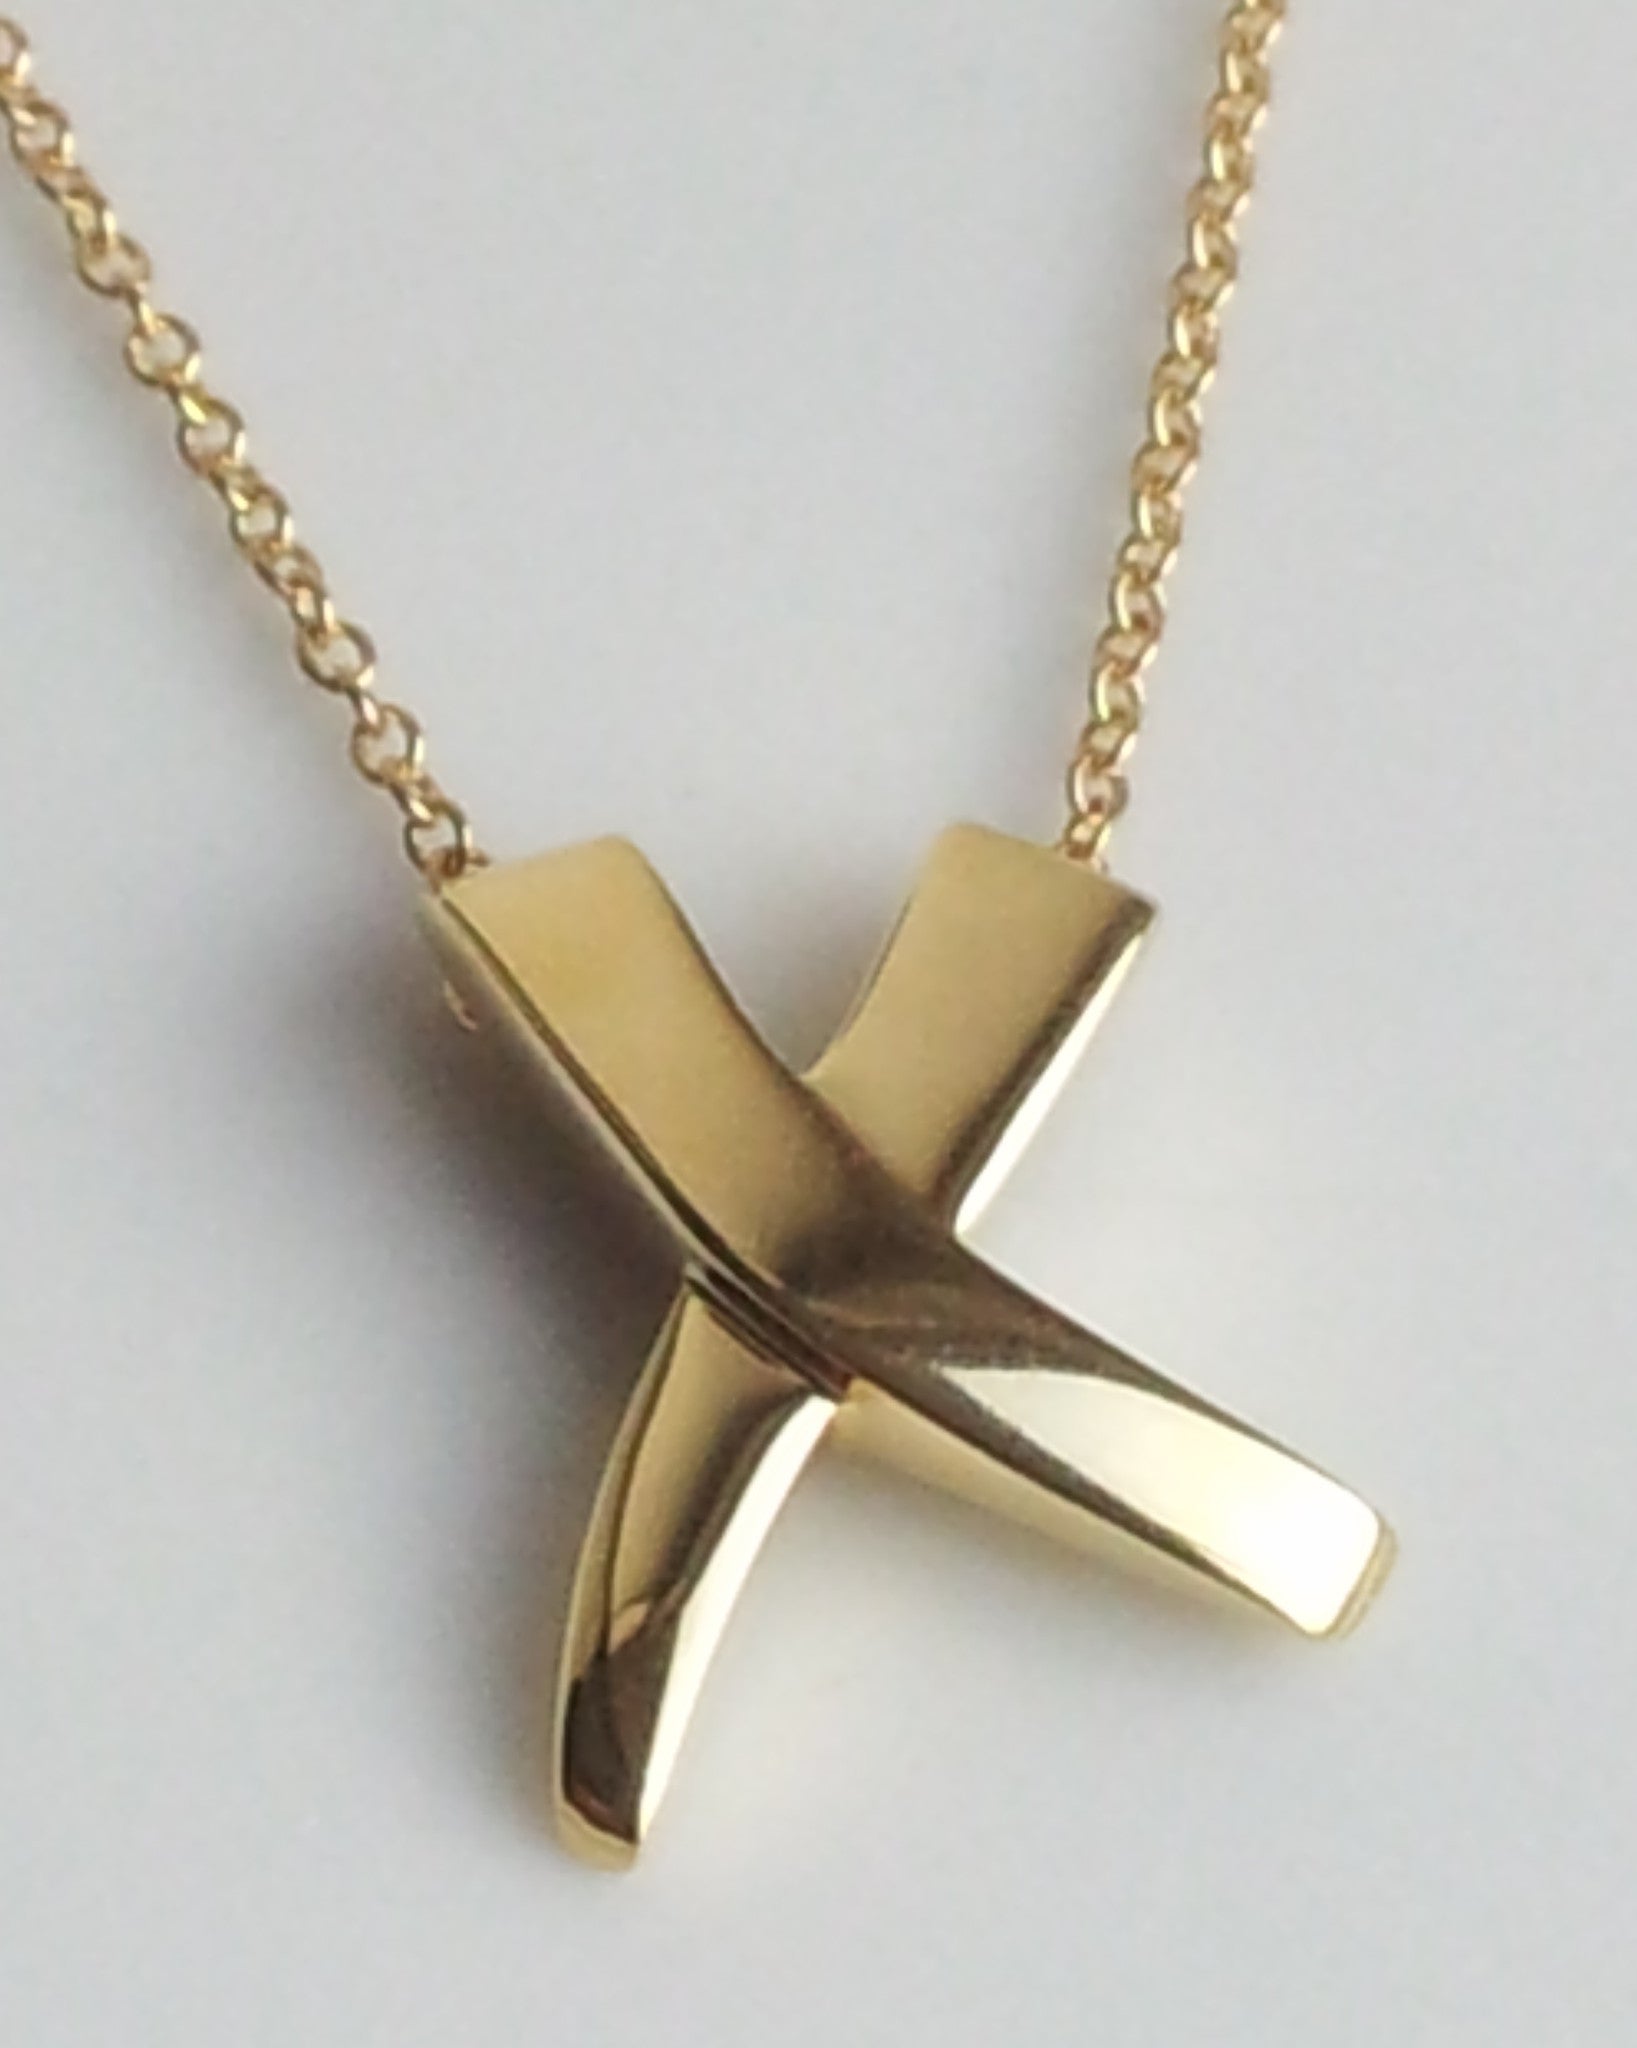 Tiffany & Co. 18K Gold 'Kiss X' Paloma Picasso Pendant on 16 inch chain necklace